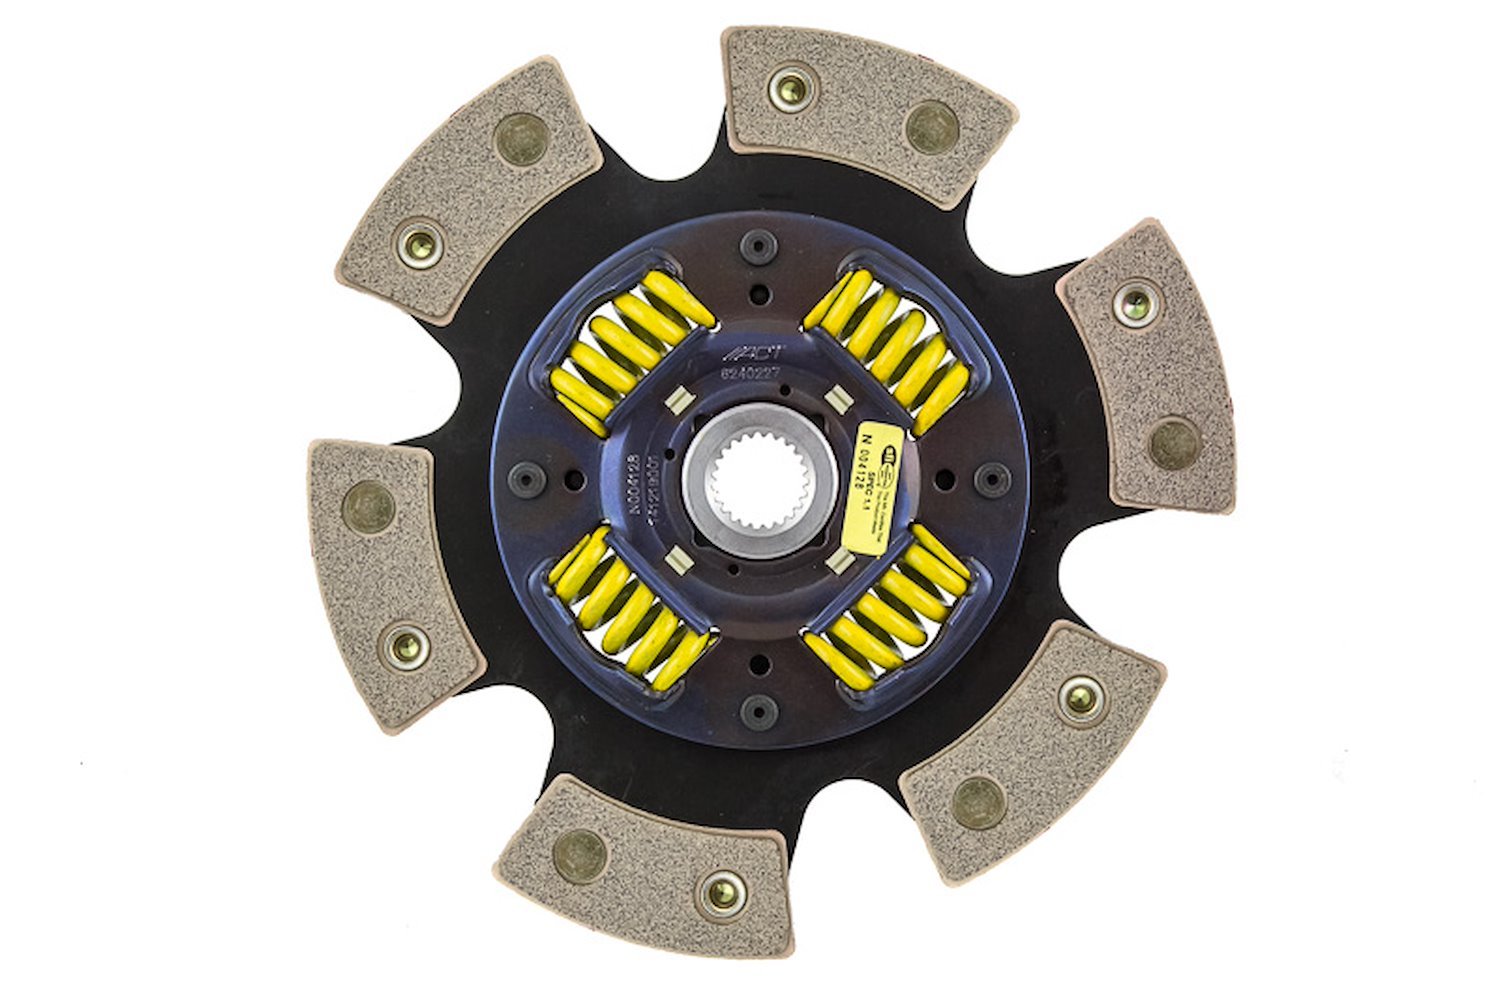 6-Pad Sprung Race Disc Transmission Clutch Friction Plate